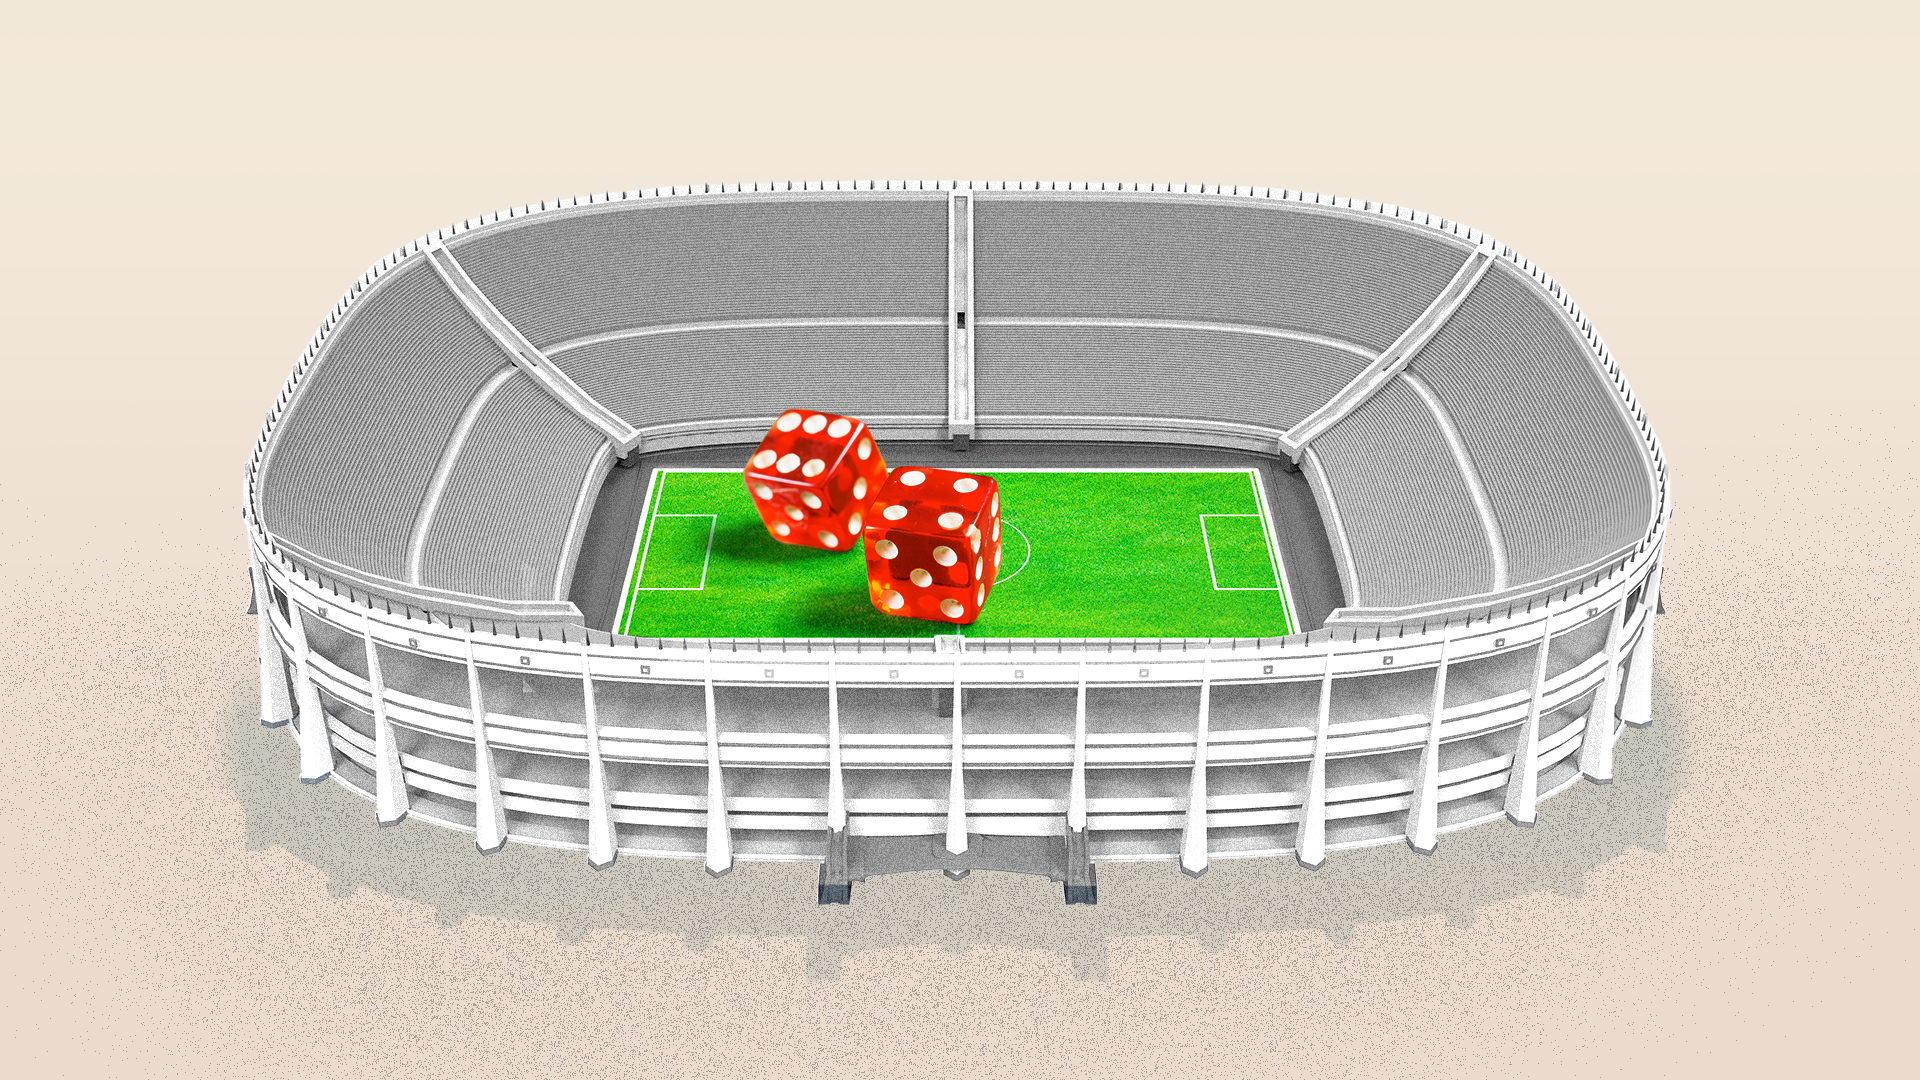 An illustration of dice in a sports stadium.